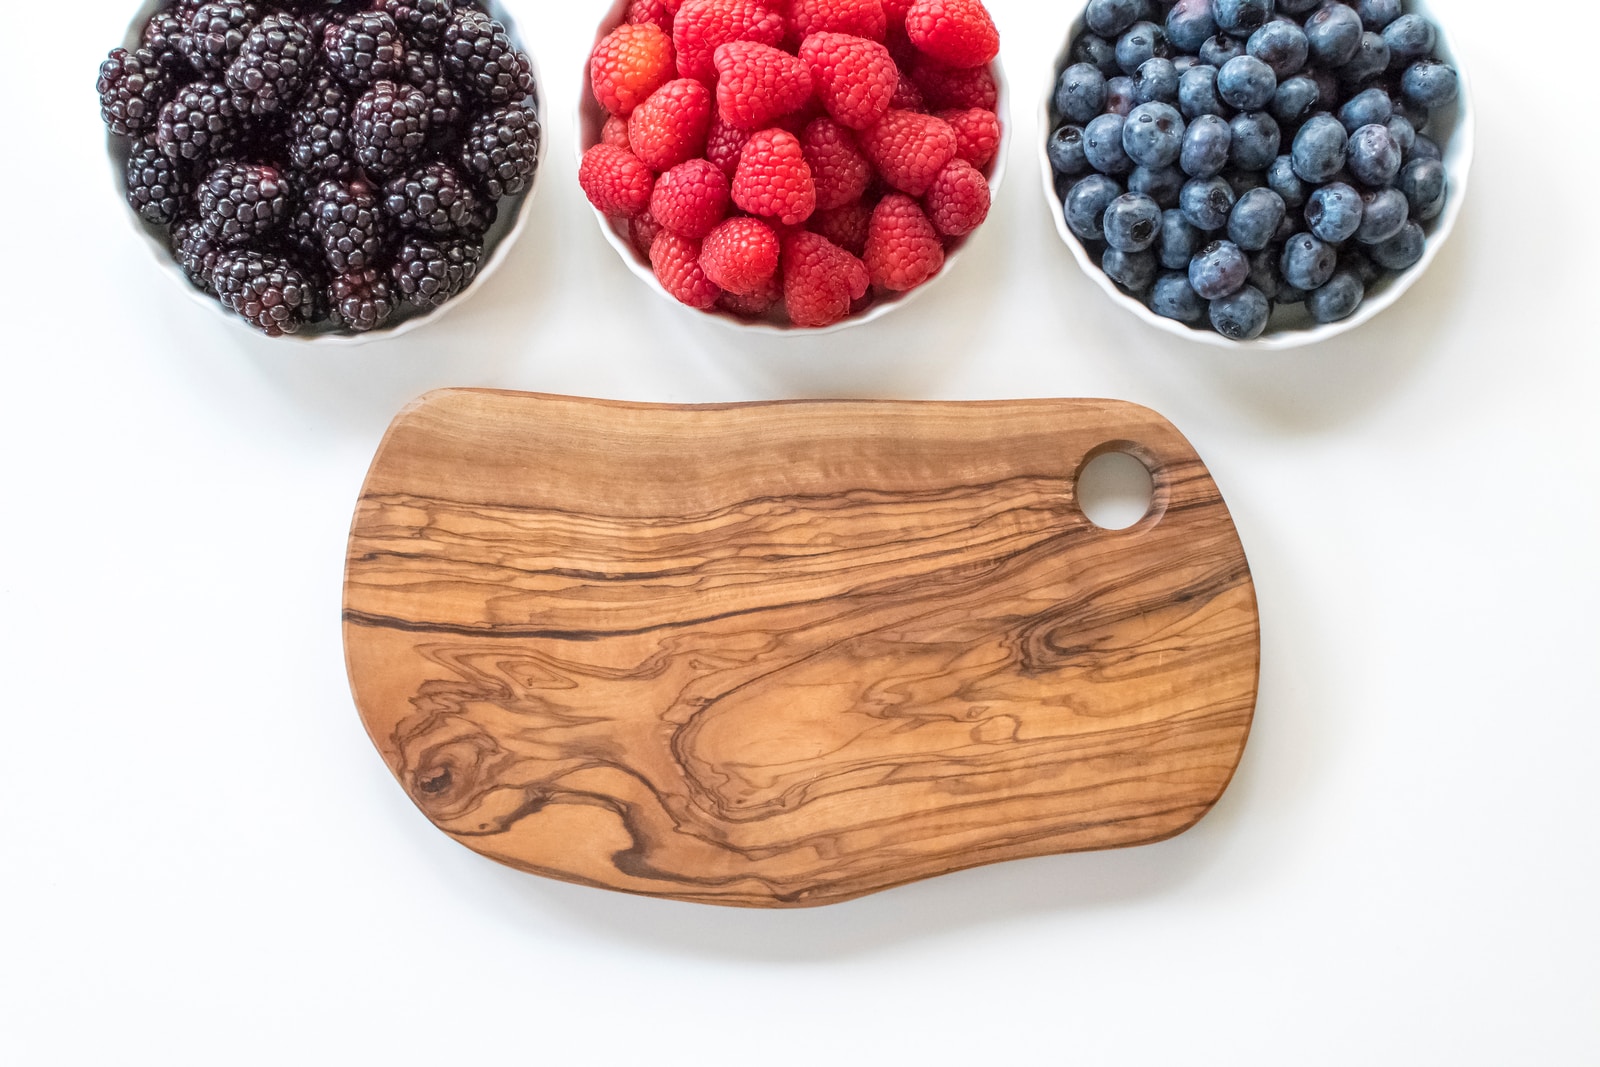 red raspberry and blue berries on brown wooden chopping board